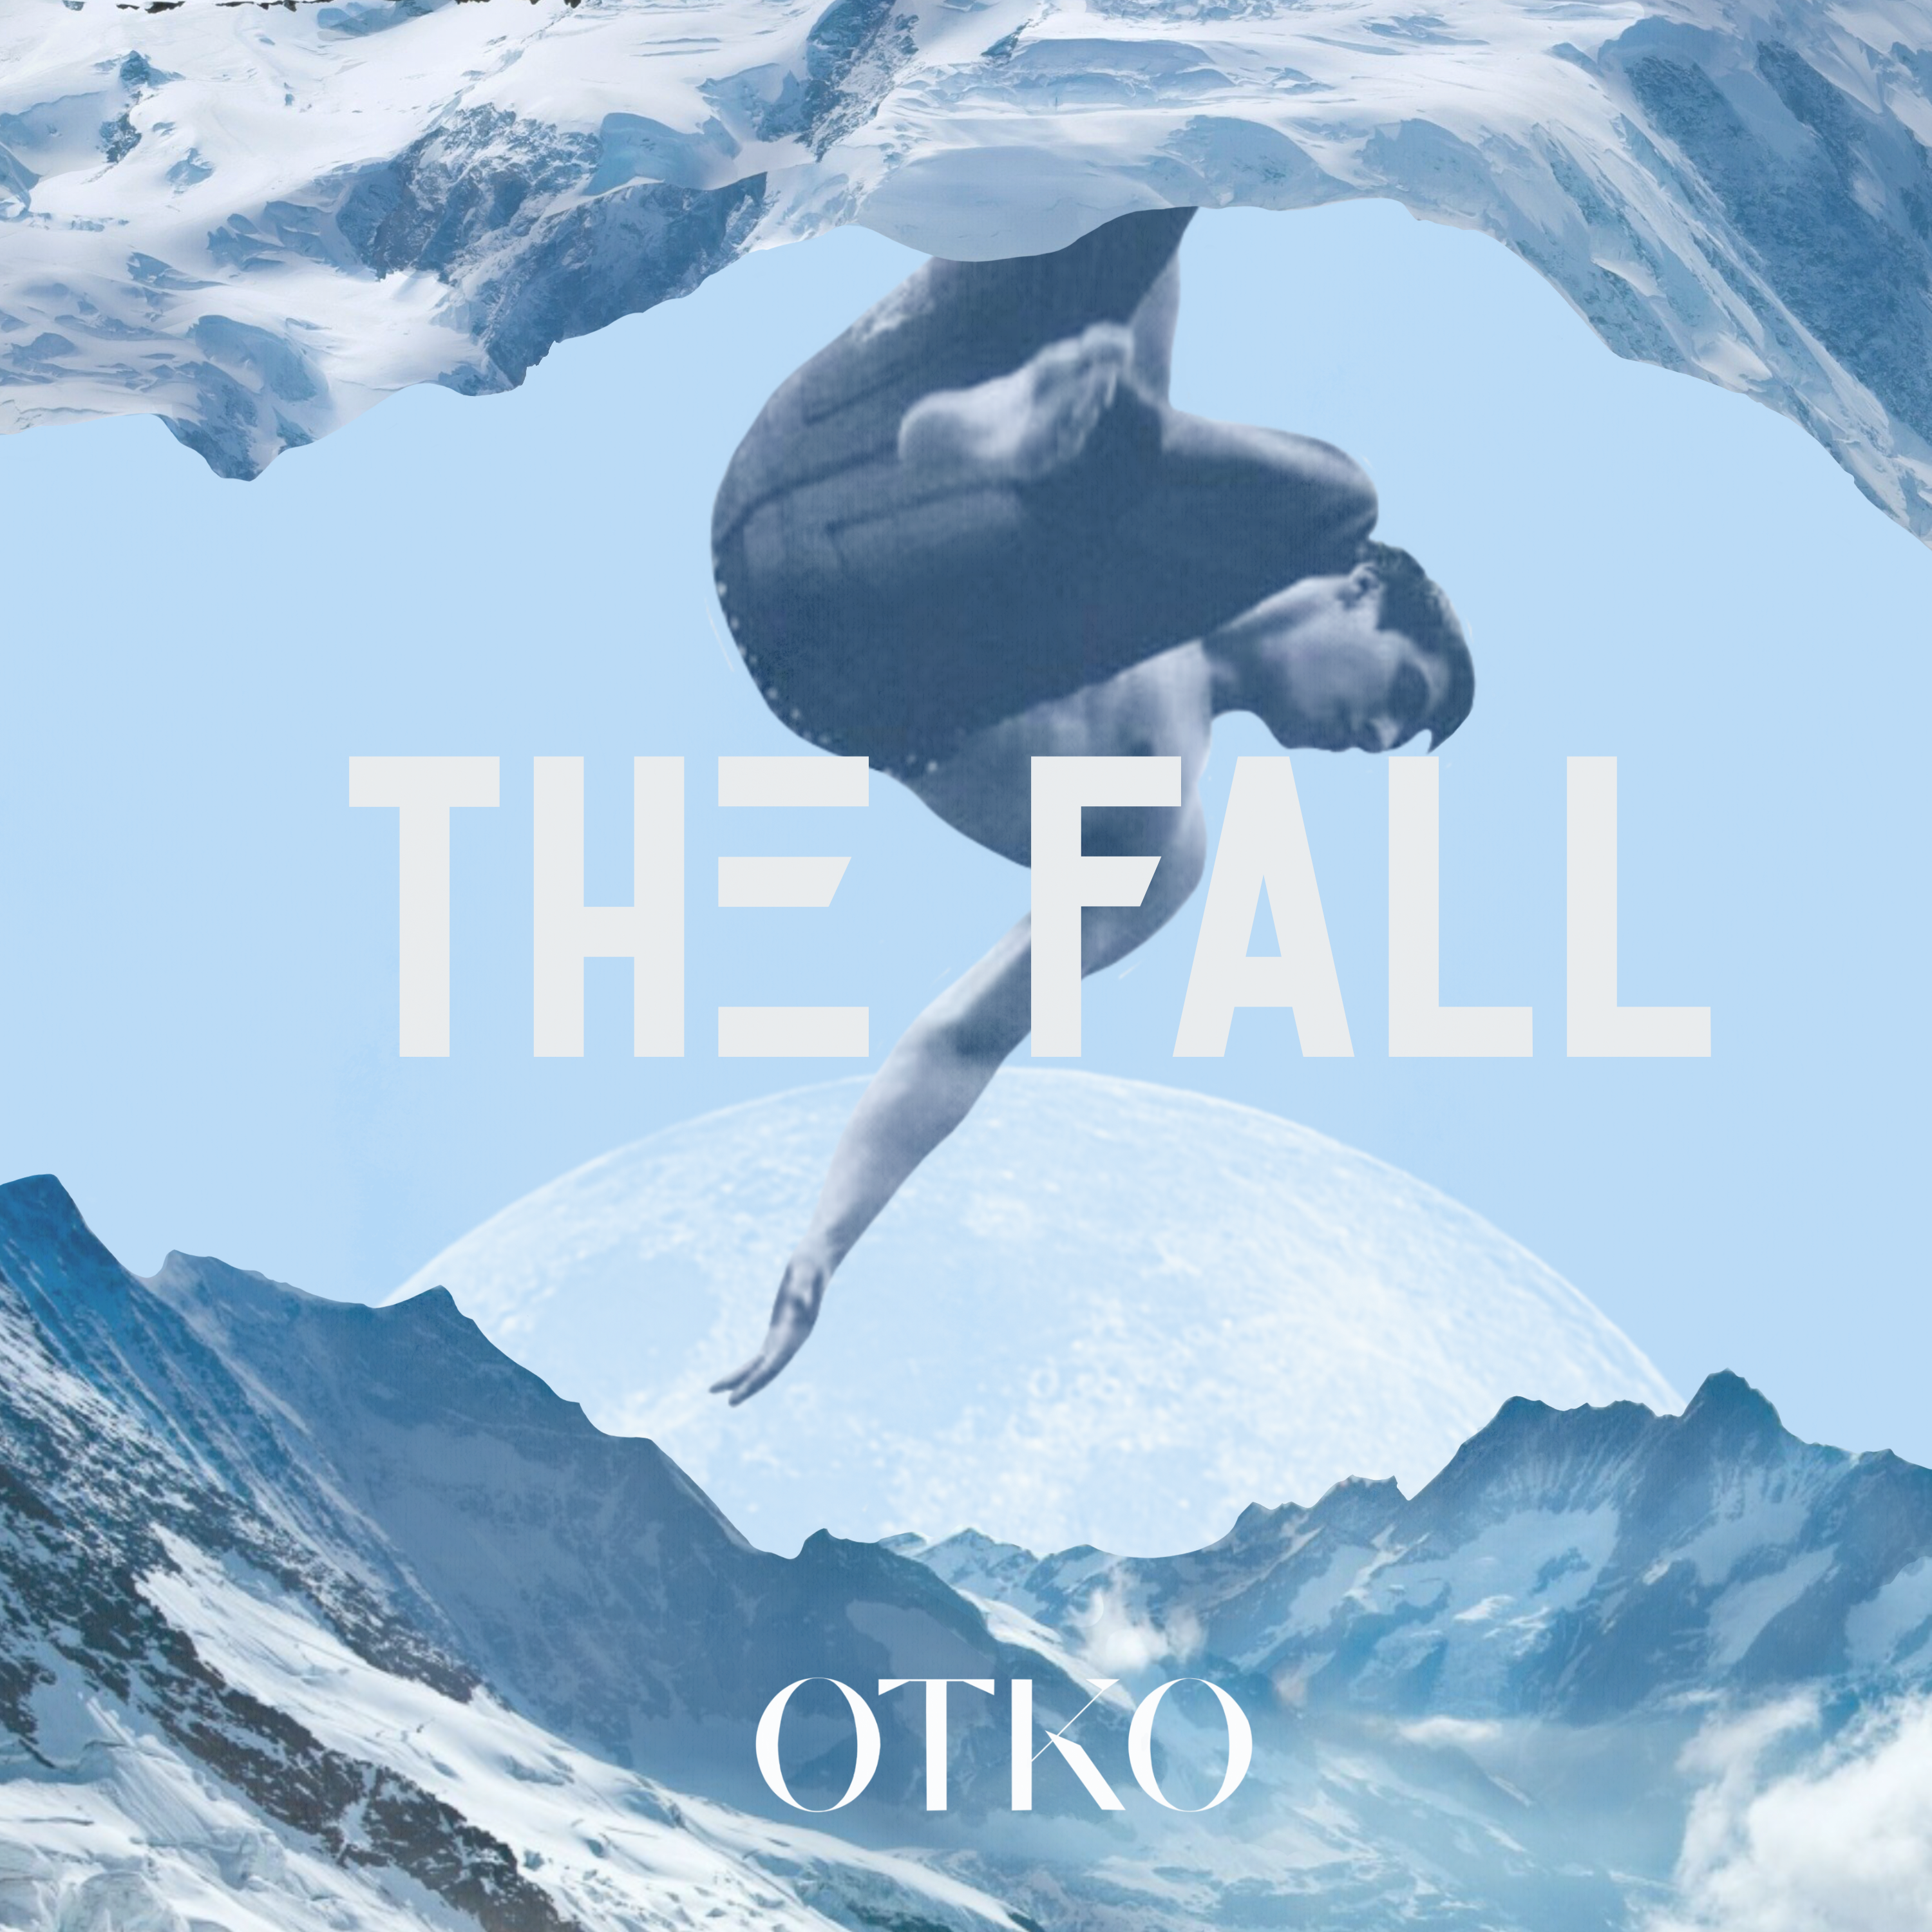 ‘The Fall Feat. JaCi Leigh’ is the stunning debut single from OTKO